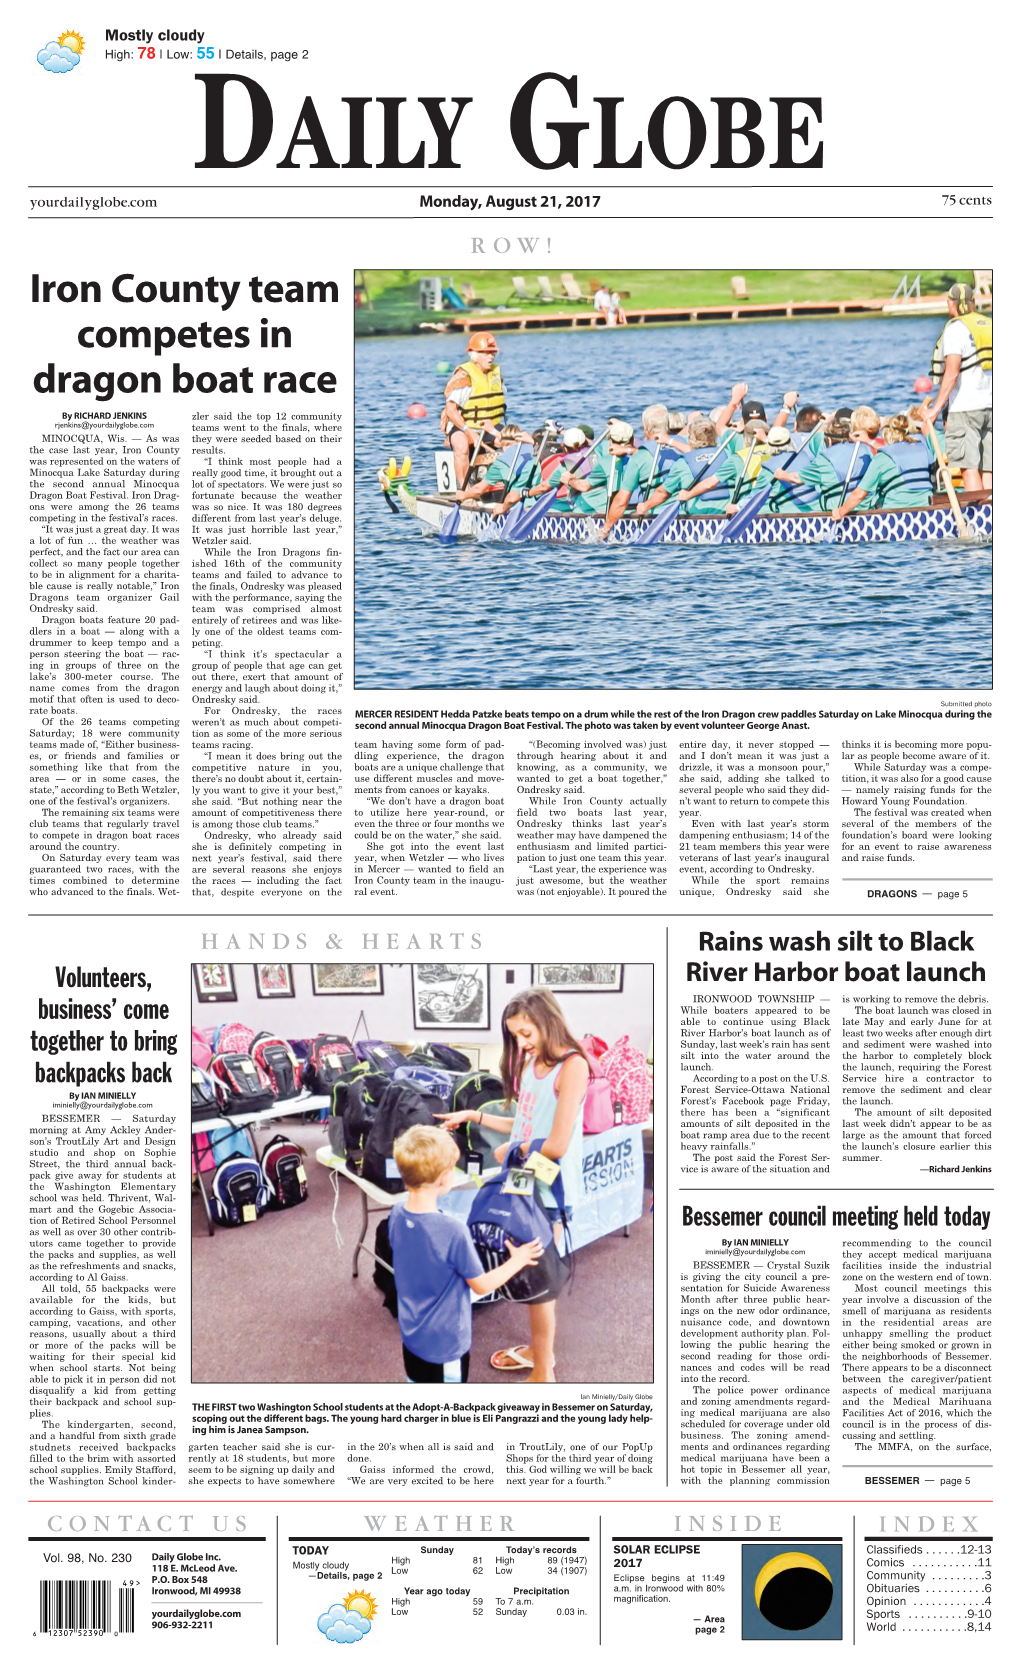 Iron County Team Competes in Dragon Boat Race